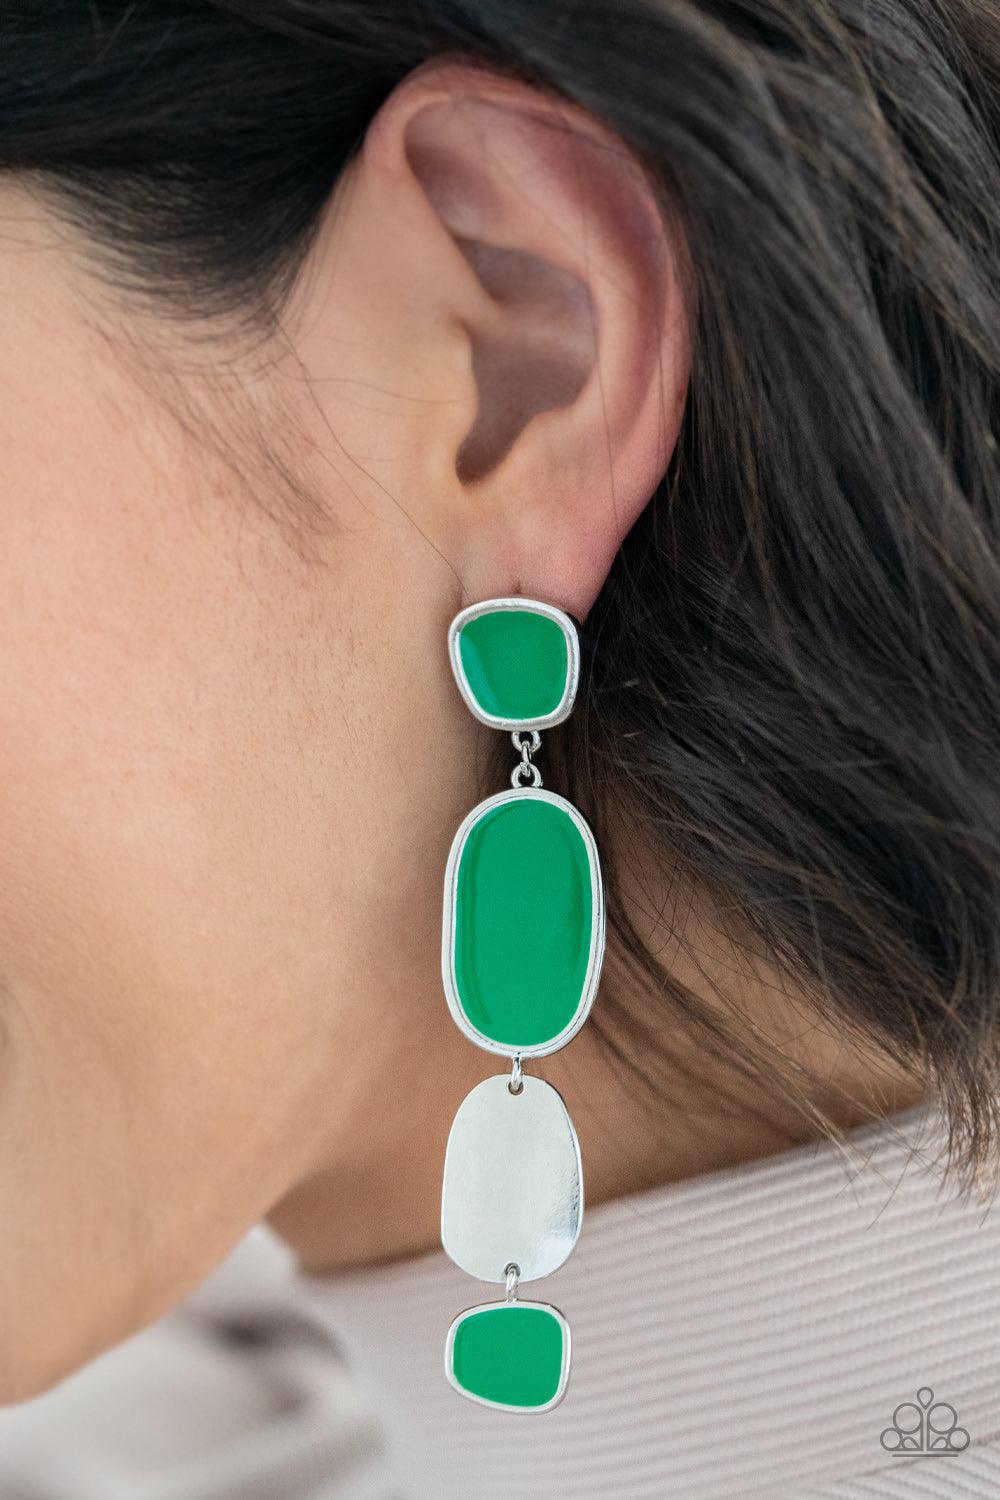 Paparazzi Accessories All Out Allure - Green Painted in a shiny Mint finish, asymmetrical frames attach to a single silver frame, creating an abstract lure. Earring attaches to a standard post fitting. Sold as one pair of post earrings. Jewelry